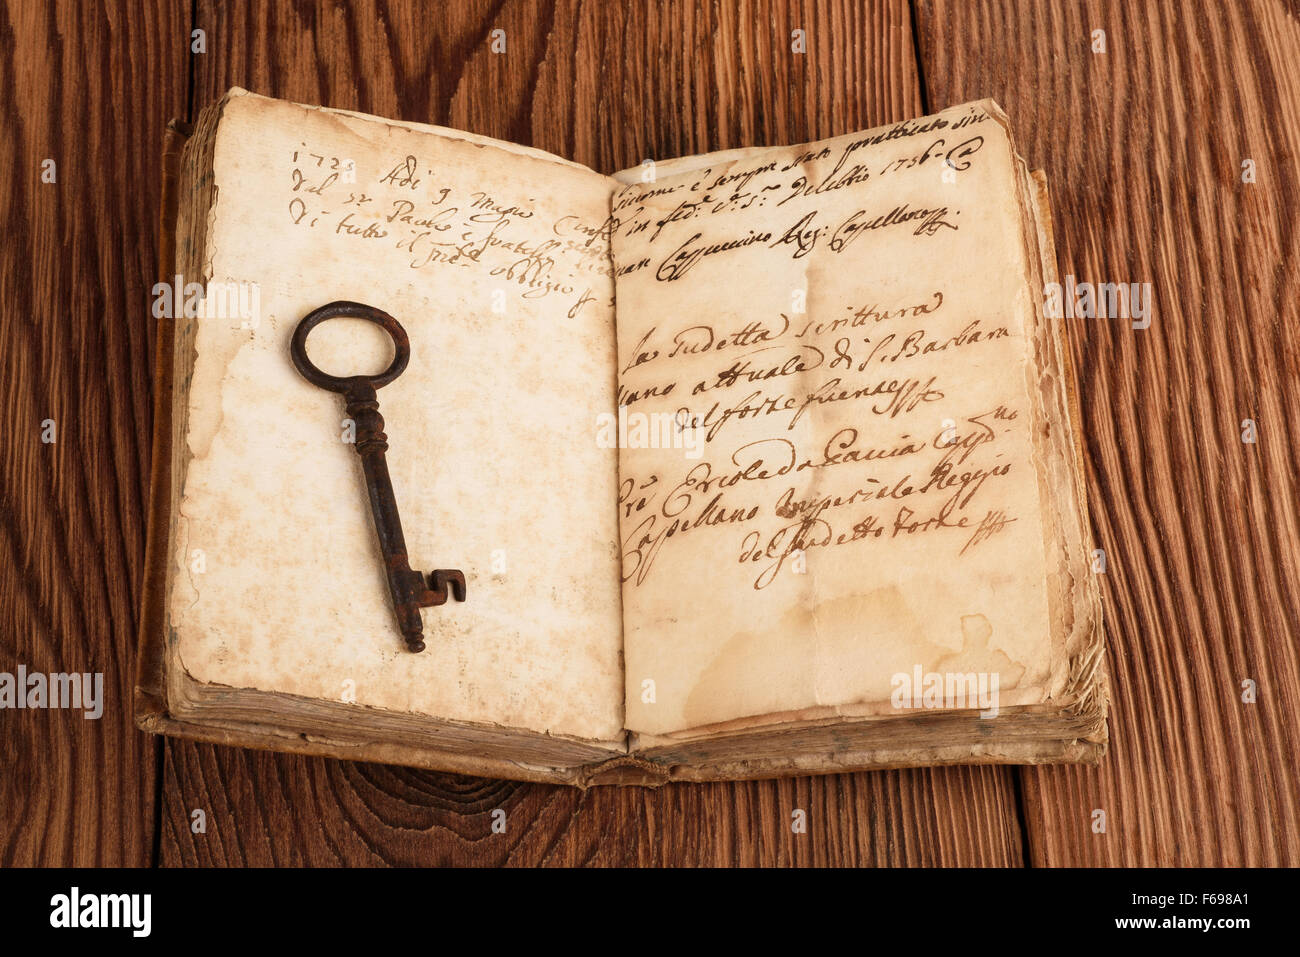 Old key on old open book Stock Photo